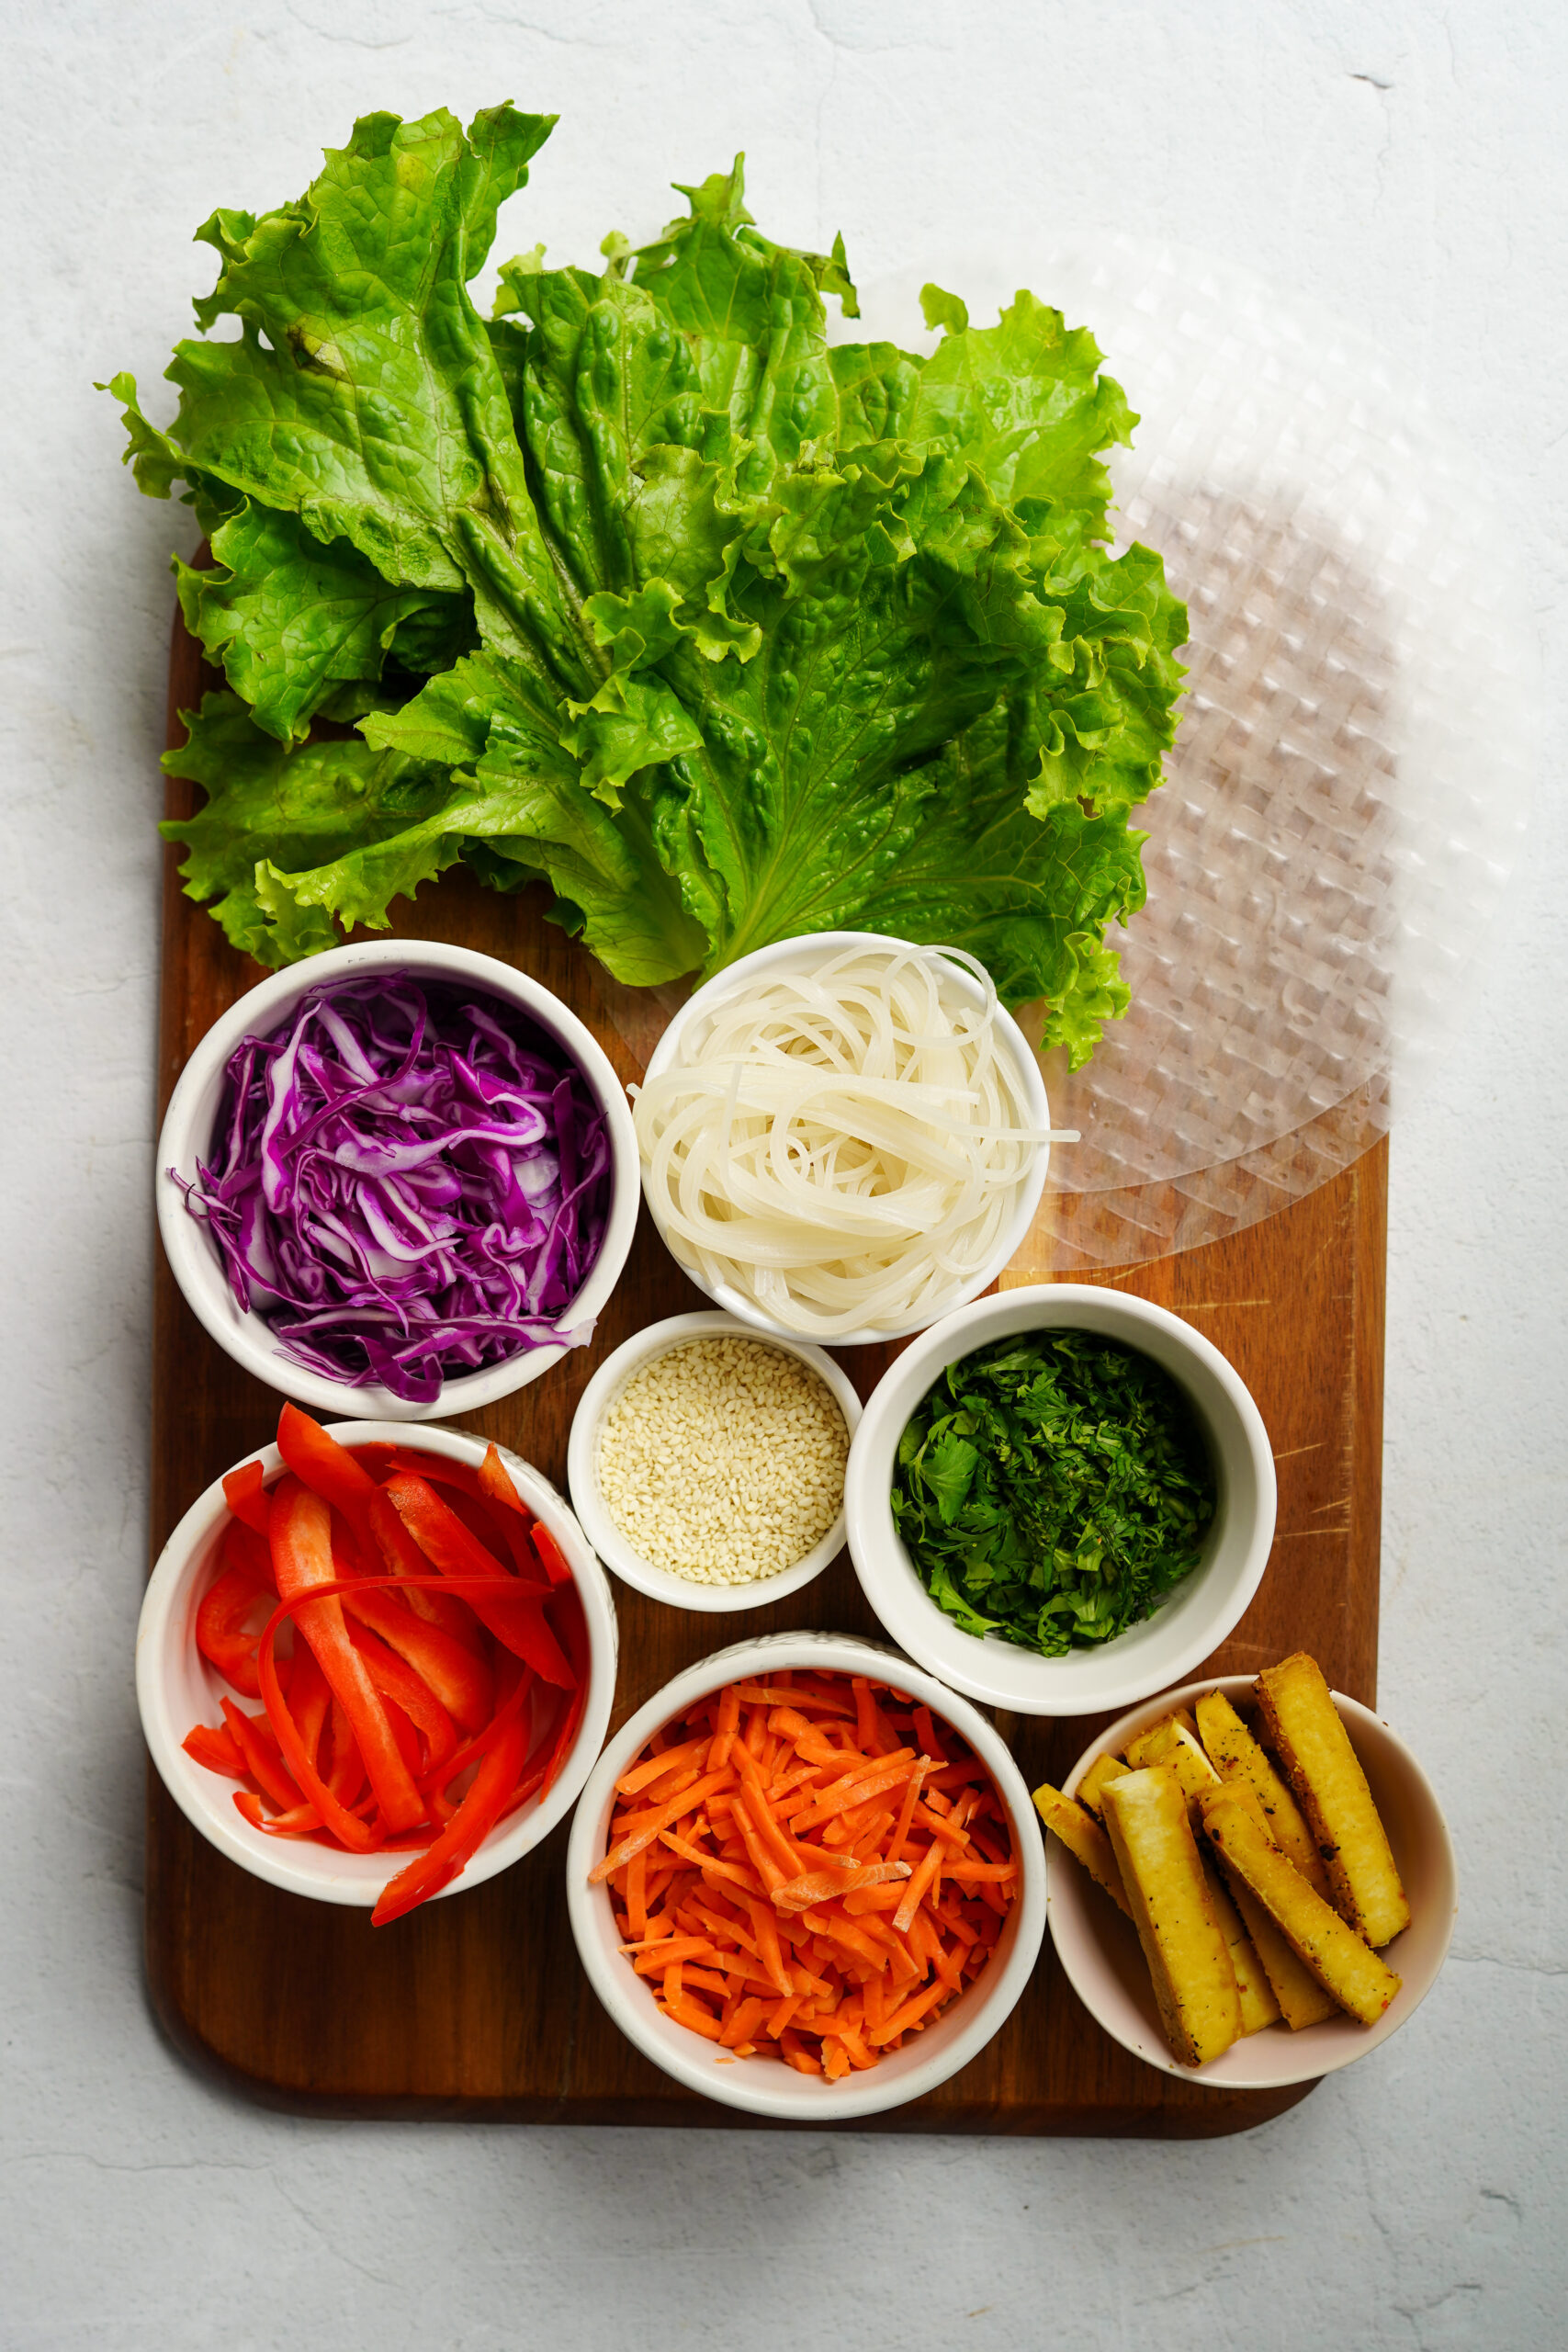 giant spring rolls ingredients laid out on a wooden cutting board